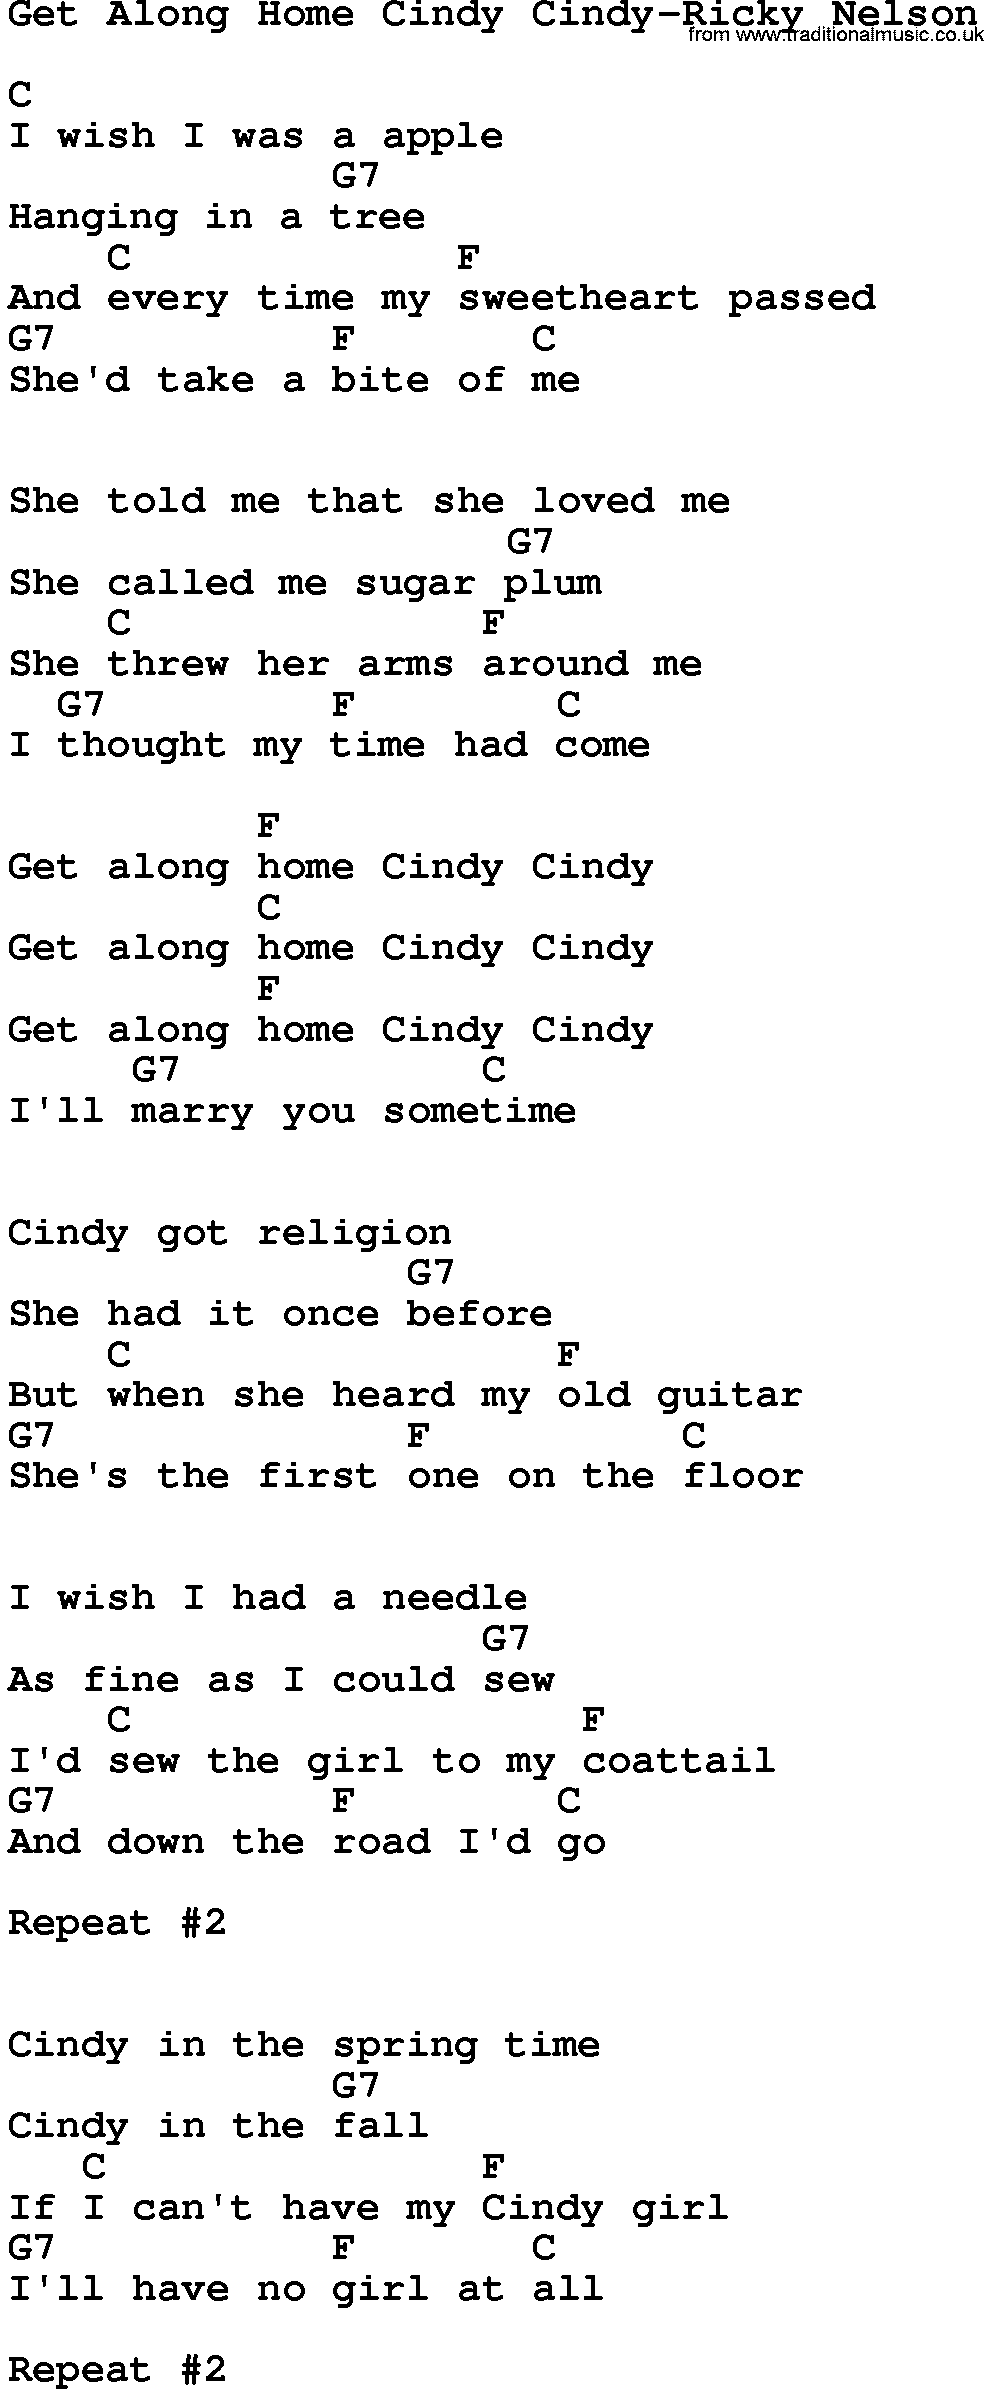 Country music song: Get Along Home Cindy Cindy-Ricky Nelson lyrics and chords